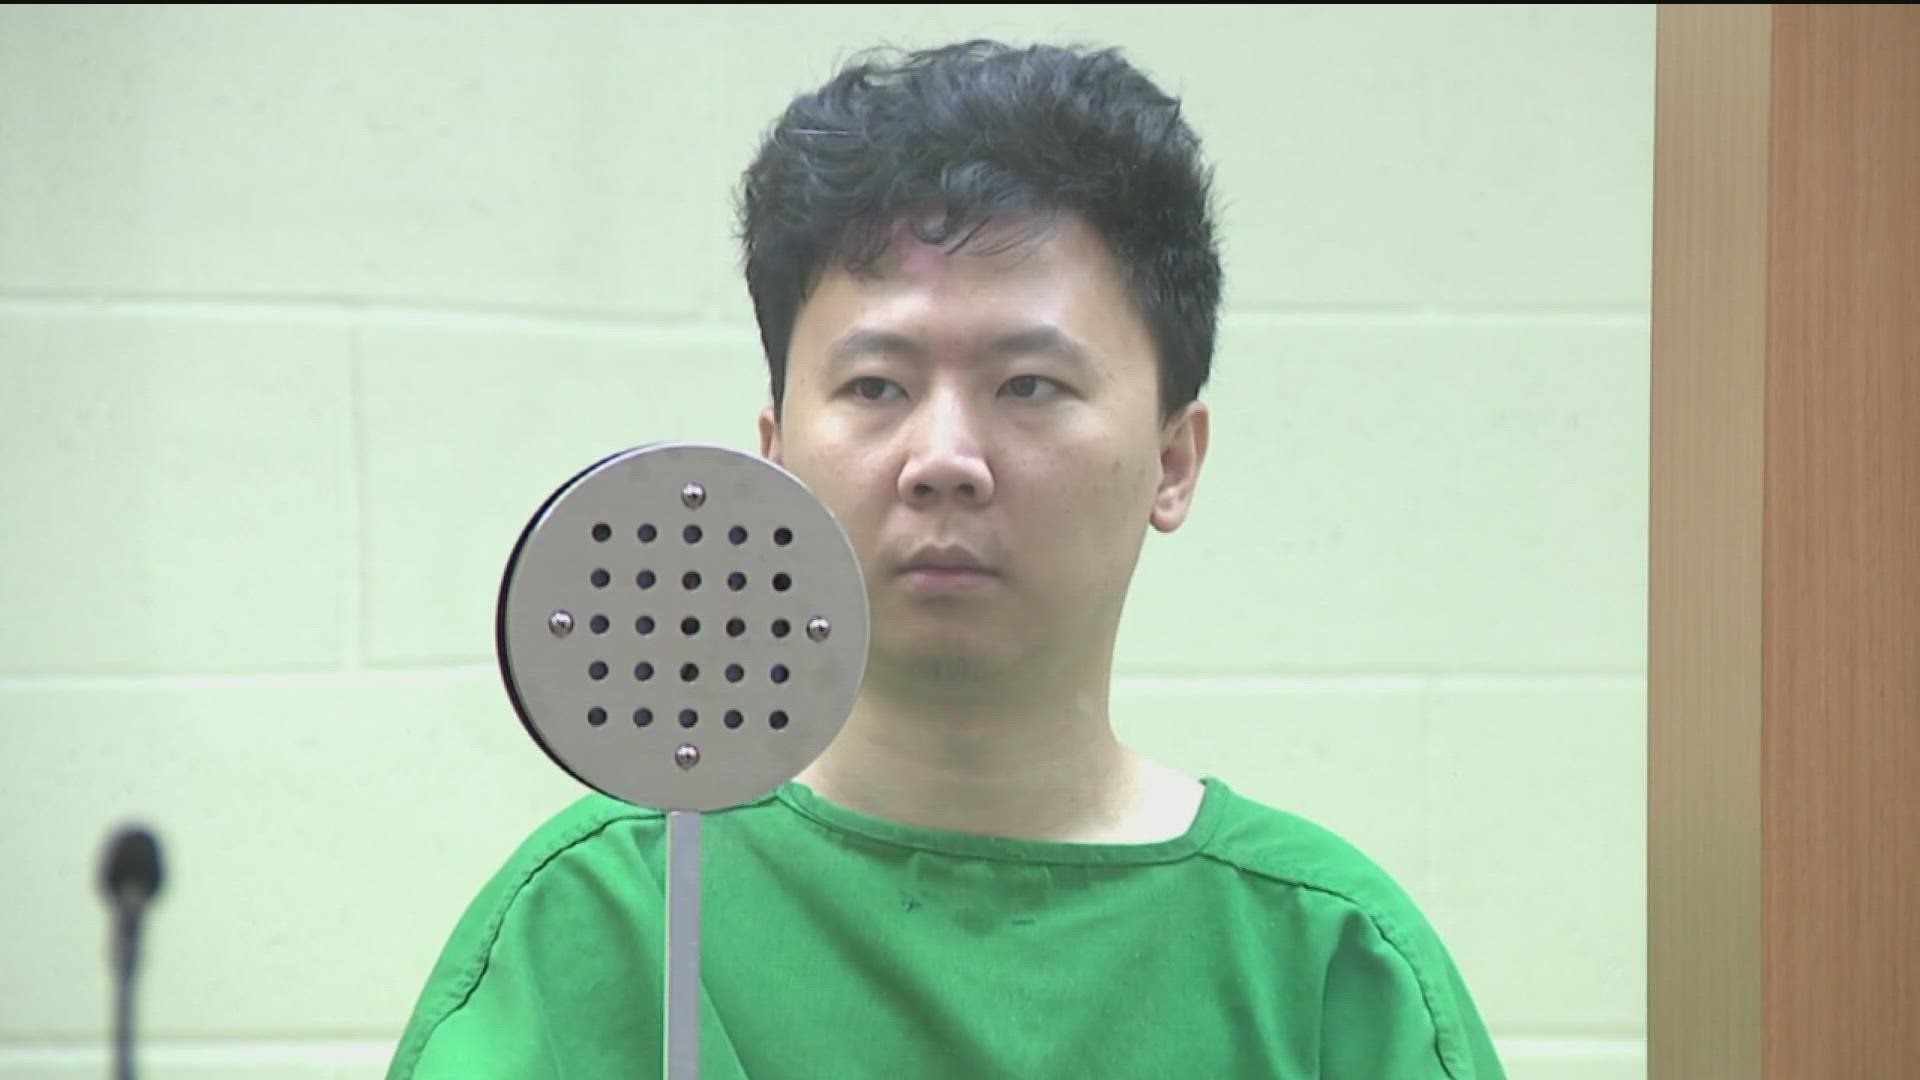 Yuhao Du, who is accused of shooting the CHP officer in the leg on the I-8 freeway, faces several charges including attempted murder.